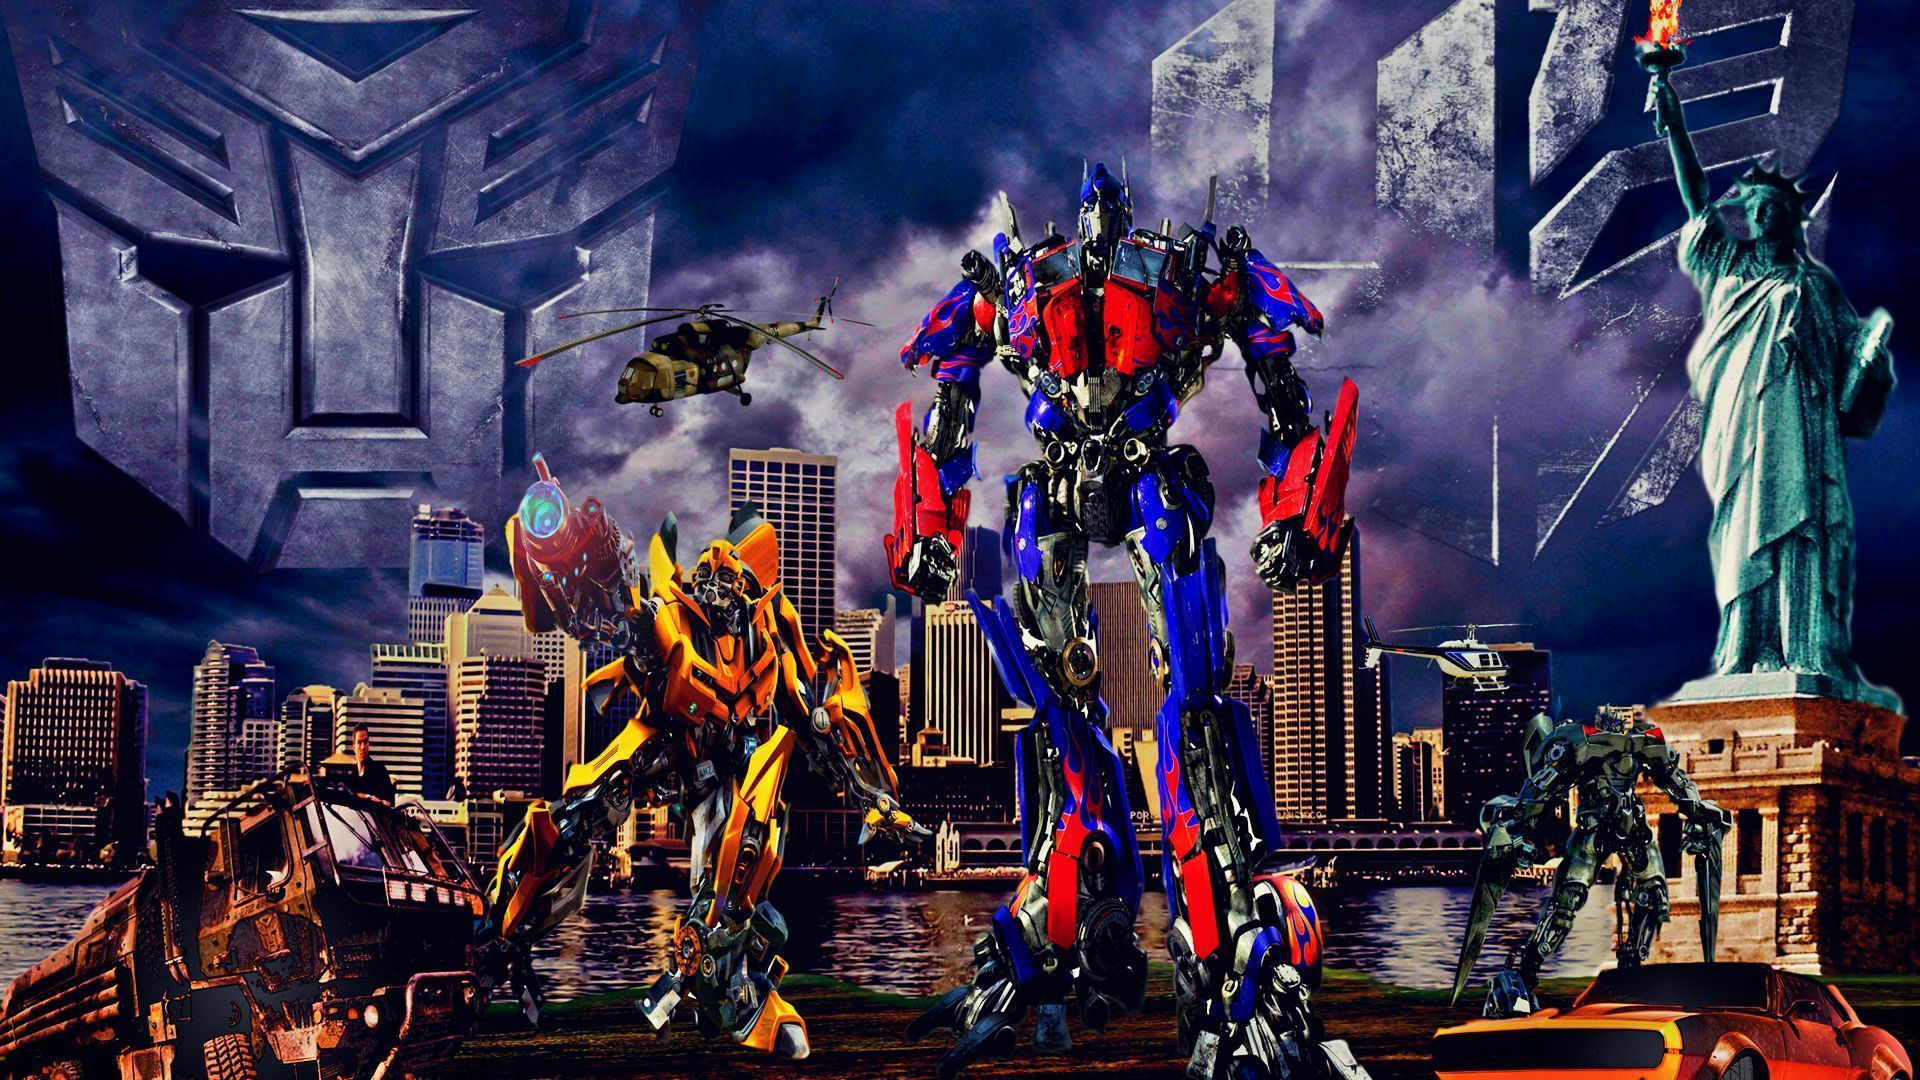 Transformers-4-Age-of-Extinction-Wallpaper-HD - Insider Publications